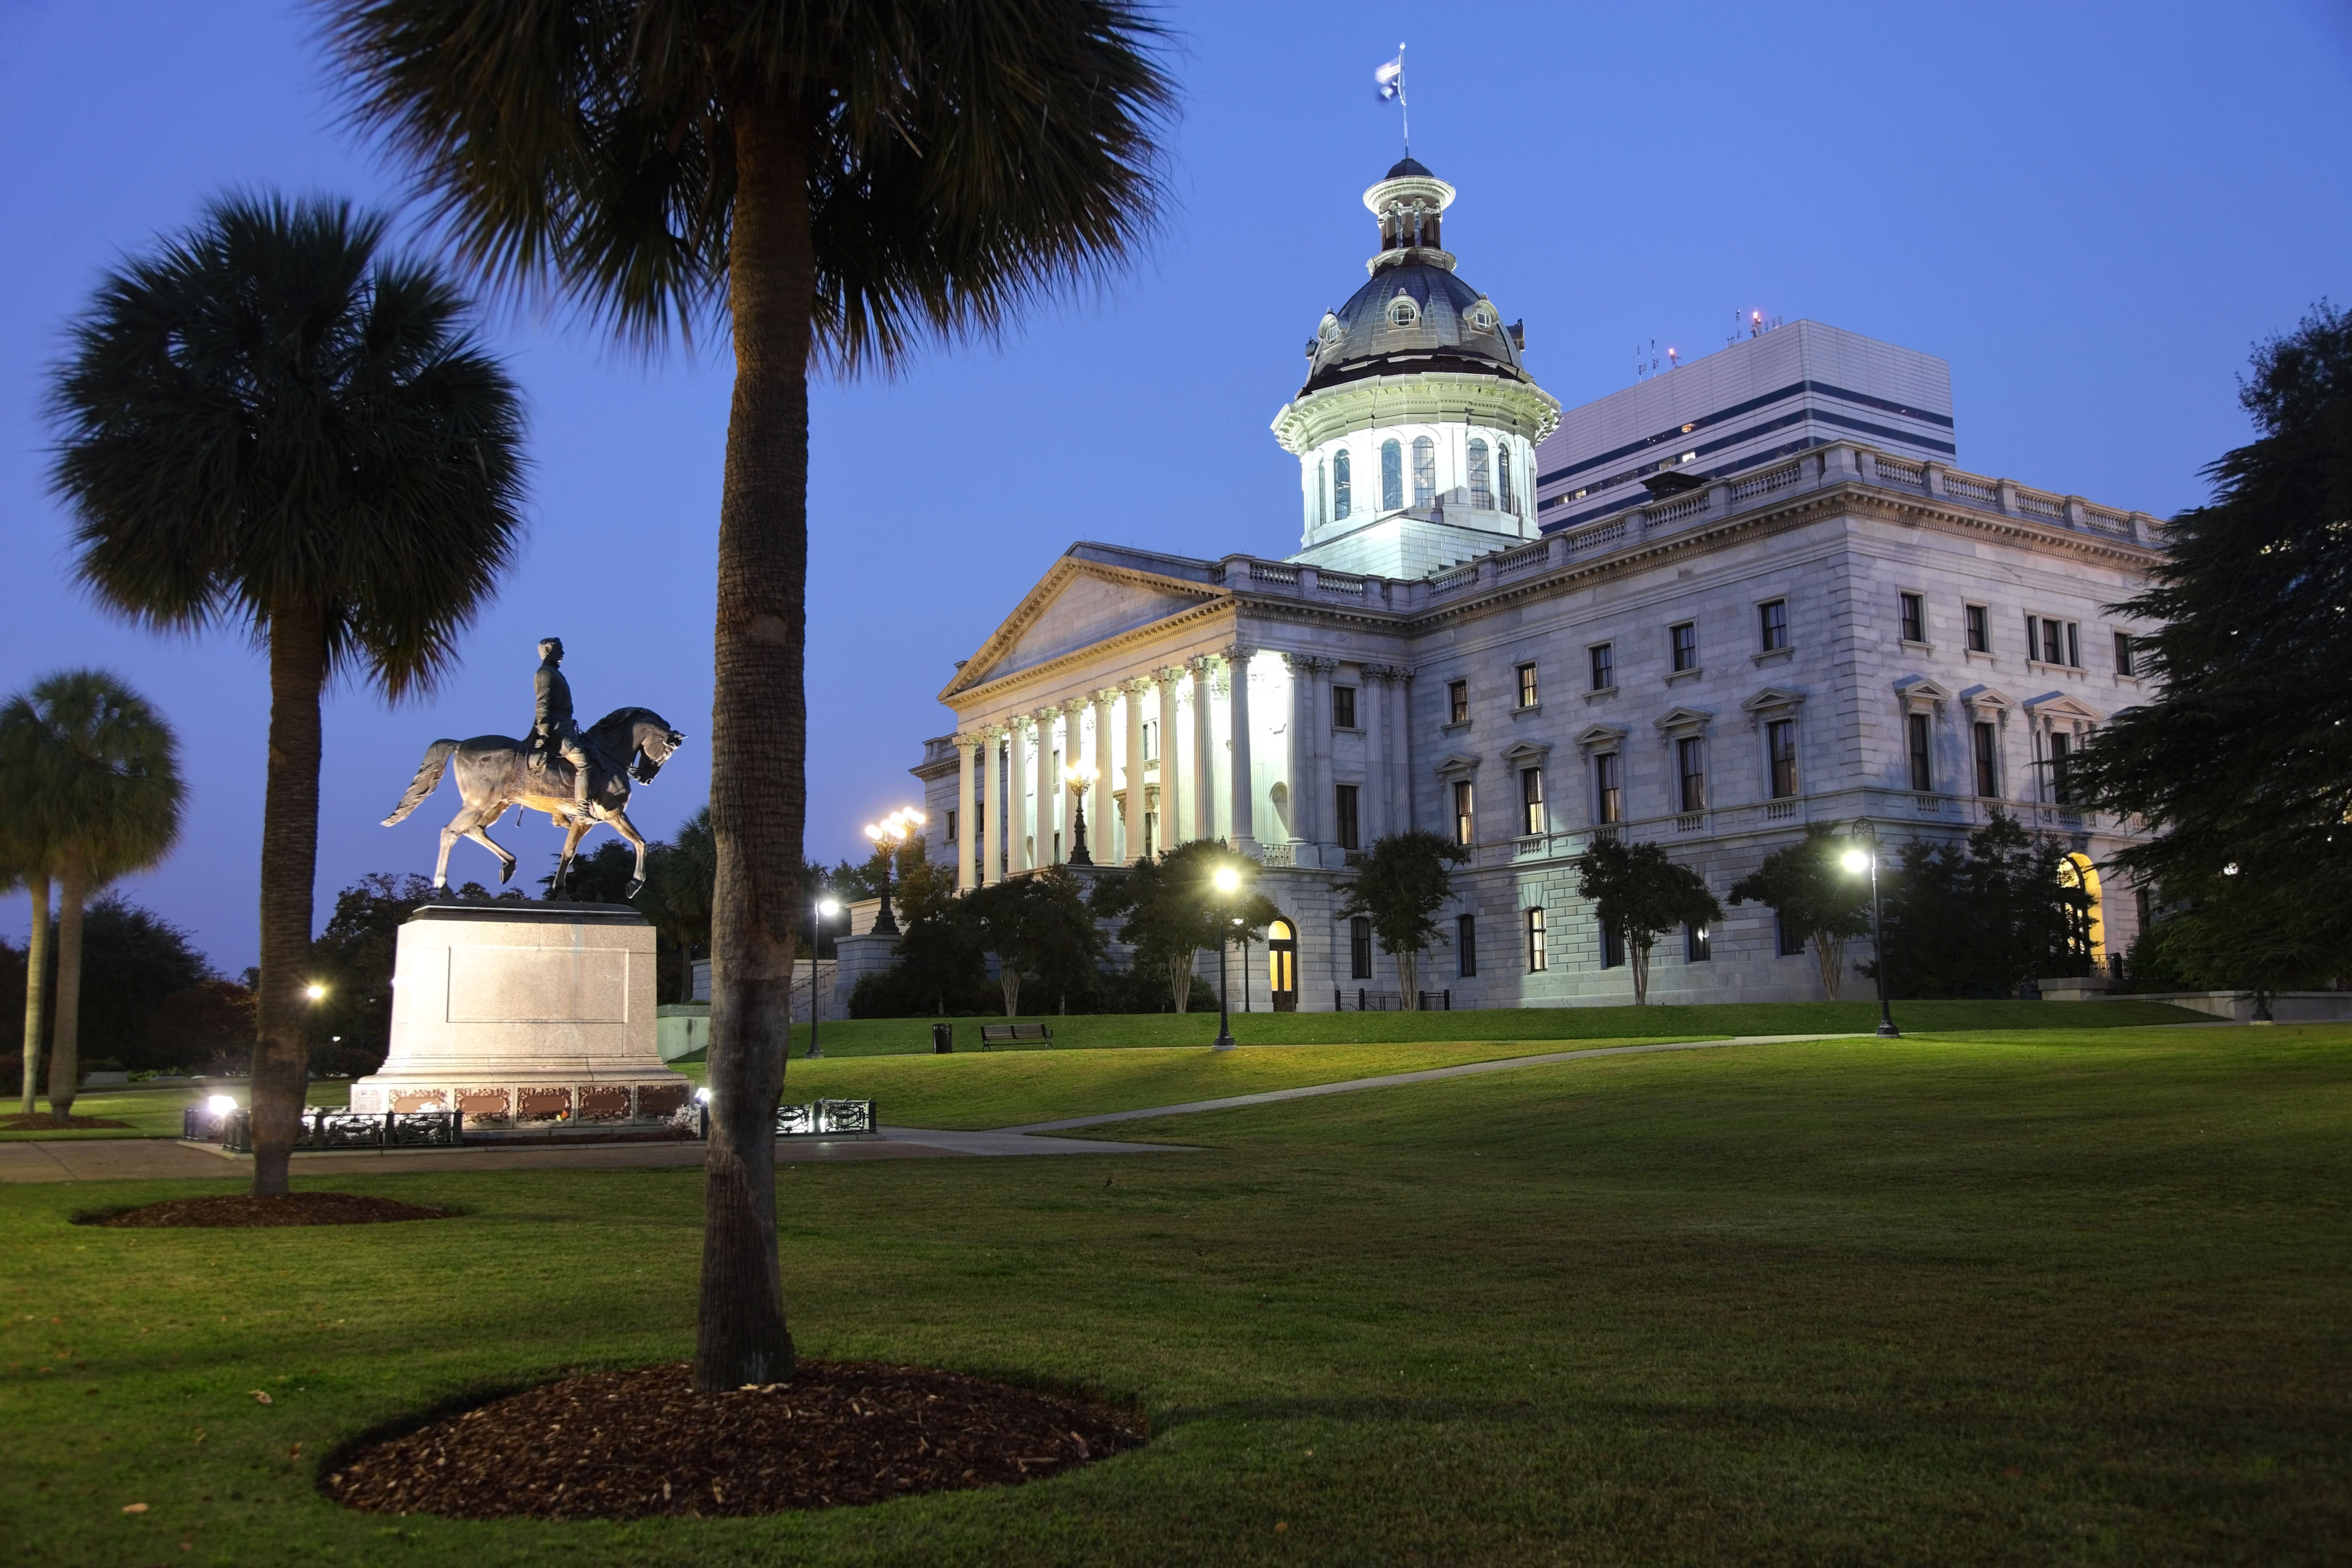 The South Carolina State House is the building housing the government of the U.S. state of South Carolina